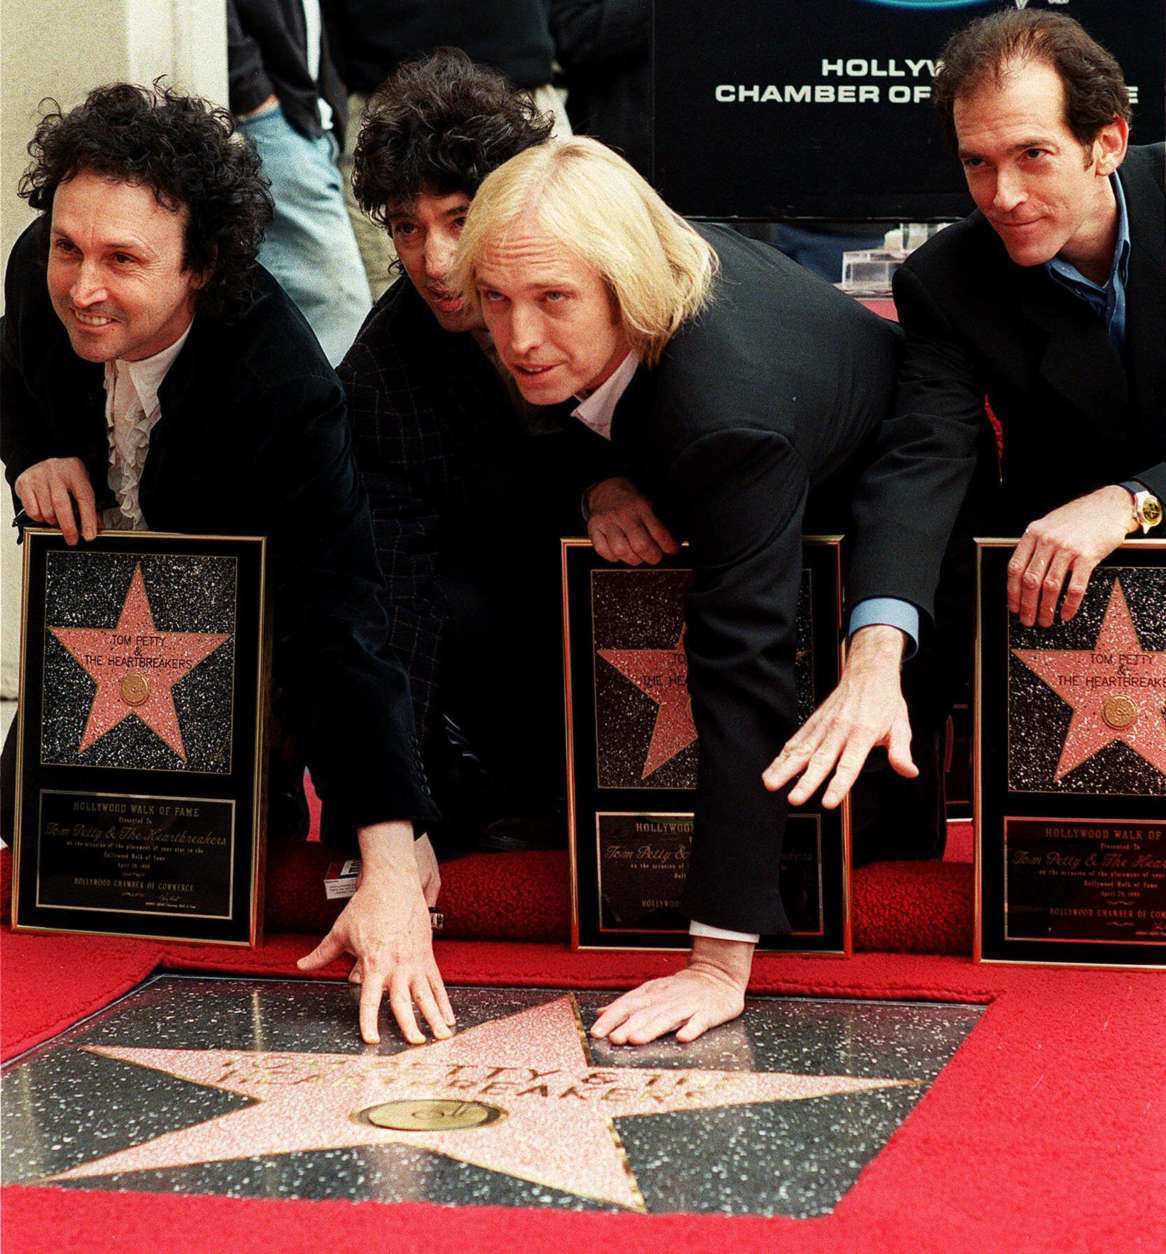 Tom Petty and the Heartbreakers rock band members, left to right: Mike Campbell, Howie Epstein, Tom Petty and Benmont Tench pose for a photo, as they are honored Wednesday, April 28, 1999, with the 2,133rd star on the Hollywood Walk of Fame in the Hollywood section of Los Angeles.  Tom Petty and the Heartbreakers have sold over 30 million albums, won Grammys and MTV awards and produced over 25 classic hits. Their latest album " Echo" which was released on April 13th debuted this week at number 10 on the Billboard album chart. (AP Photo/Damian Dovarganes)